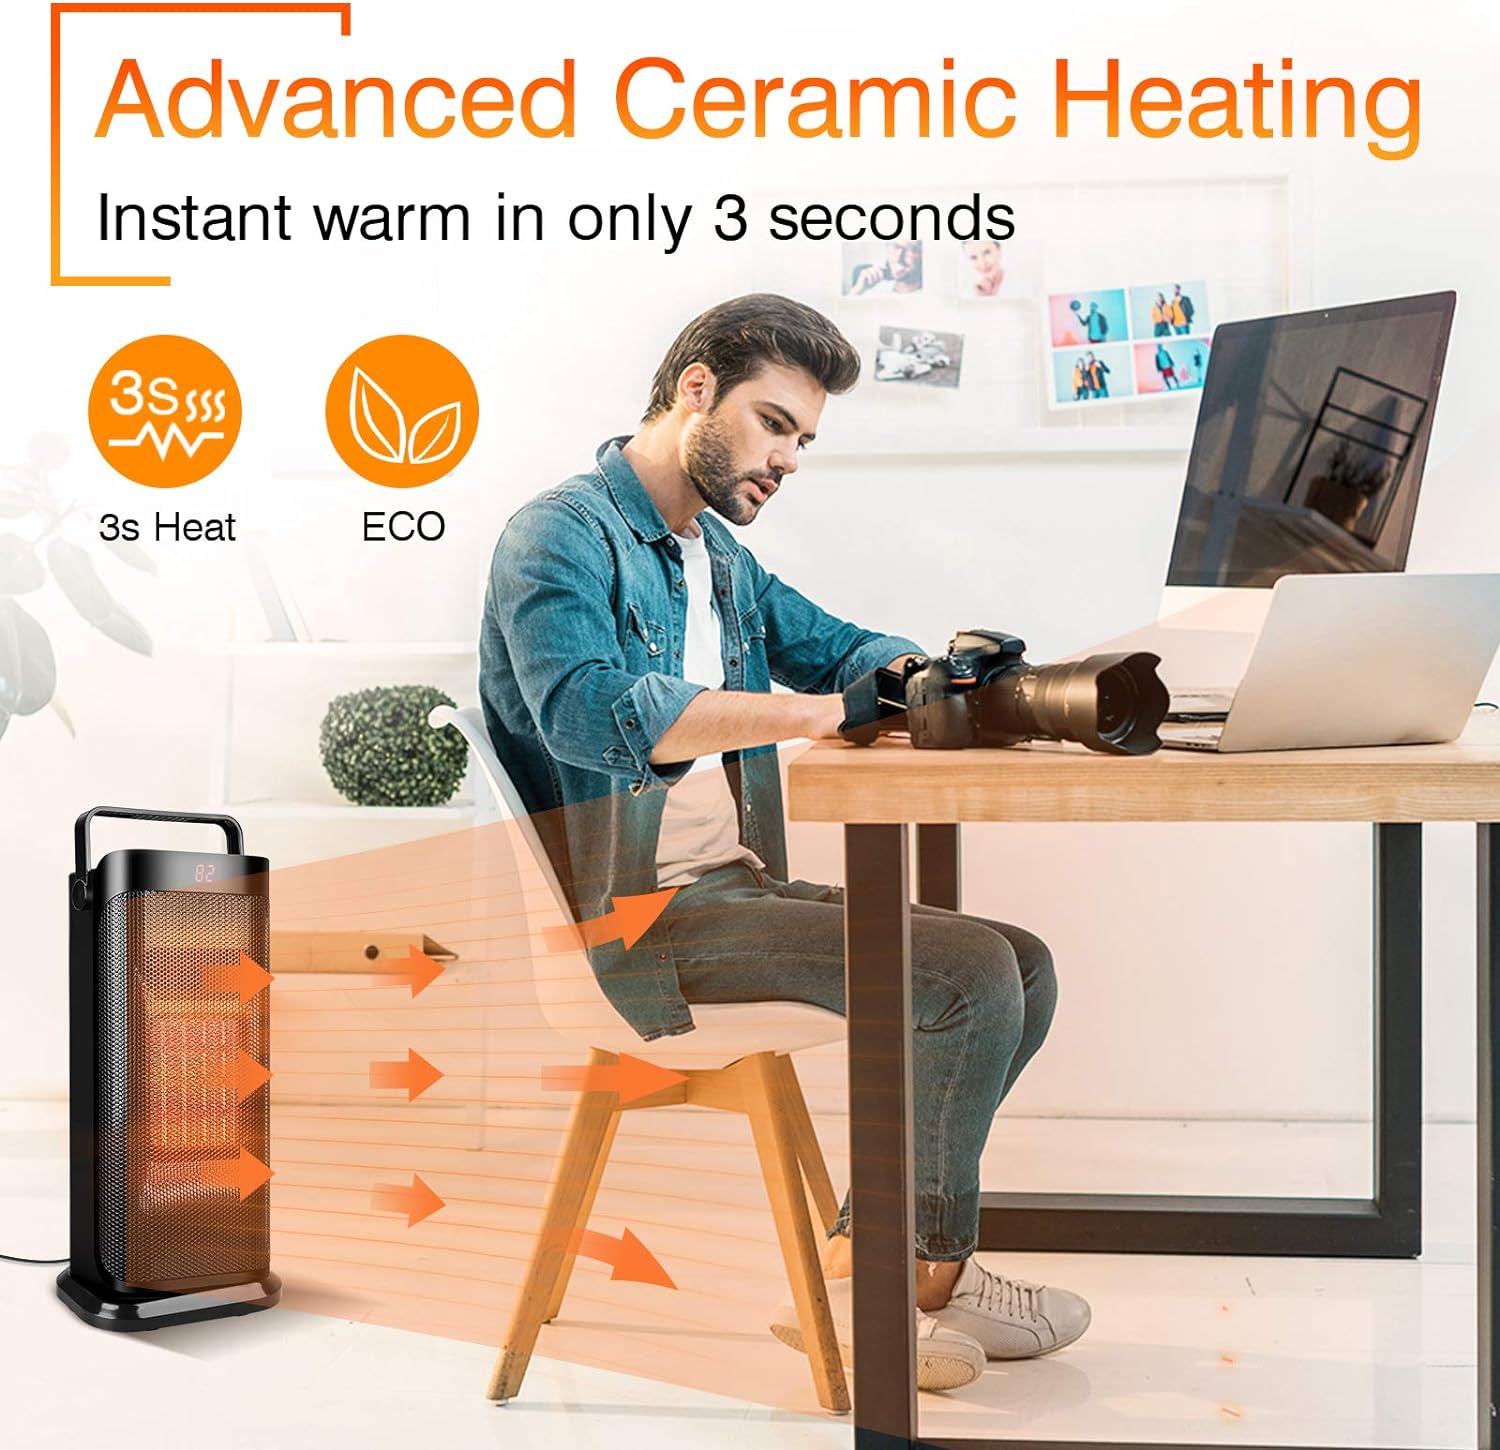 Electric Space Heater for Office - Portable Ceramic Space Heater w/Remote, 120°Oscillating, thermostat, 3 Modes, 12H Timer, Quiet Room Heater for Bedroom, Garage, Office, Home Indoor use